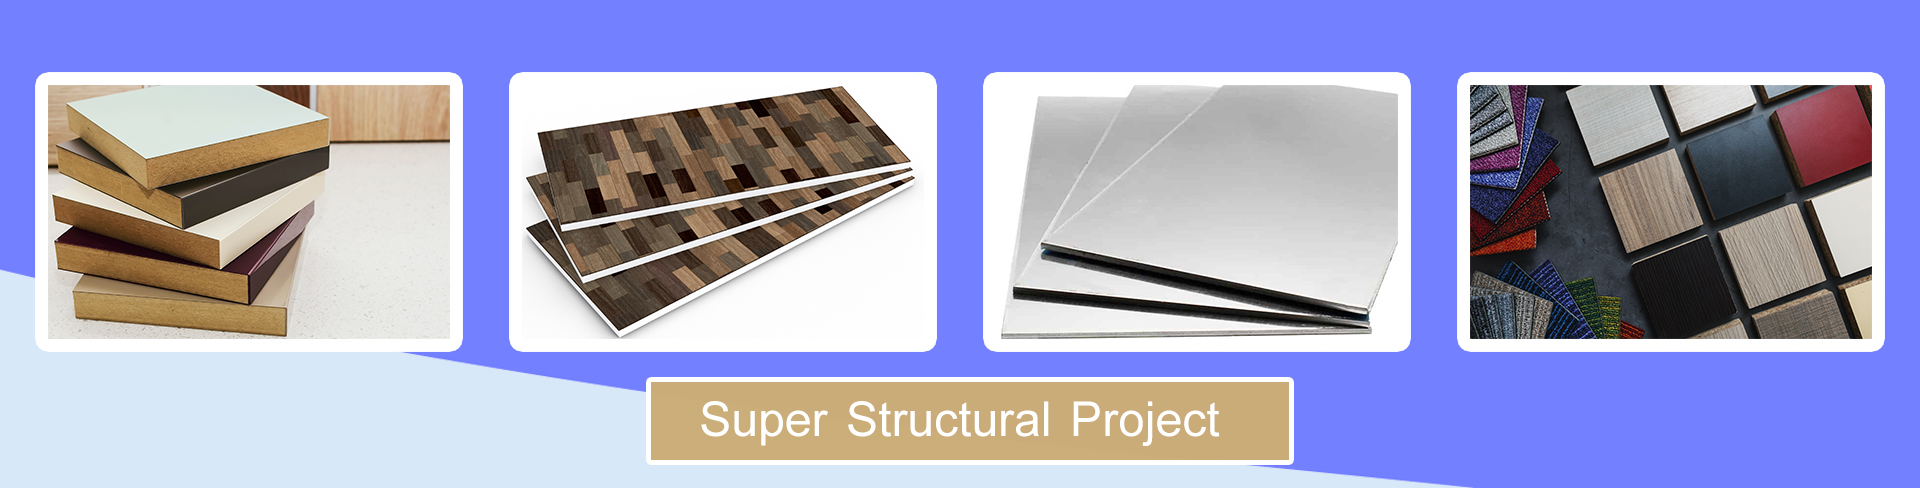 Super Structural Project